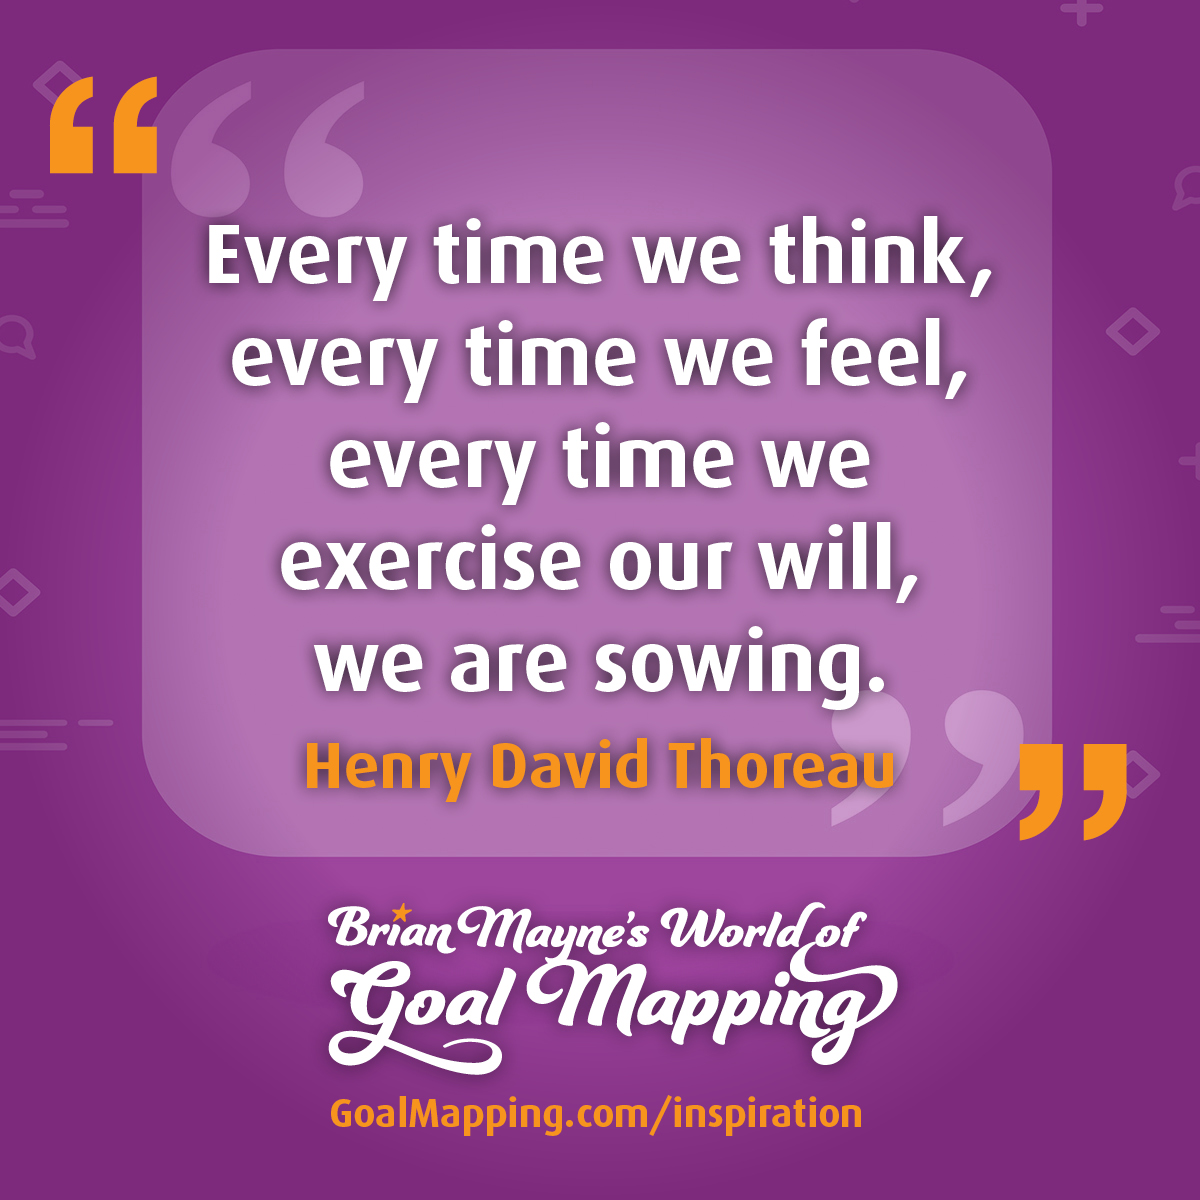 "Every time we think, every time we feel, every time we exercise our will, we are sowing." Henry David Thoreau